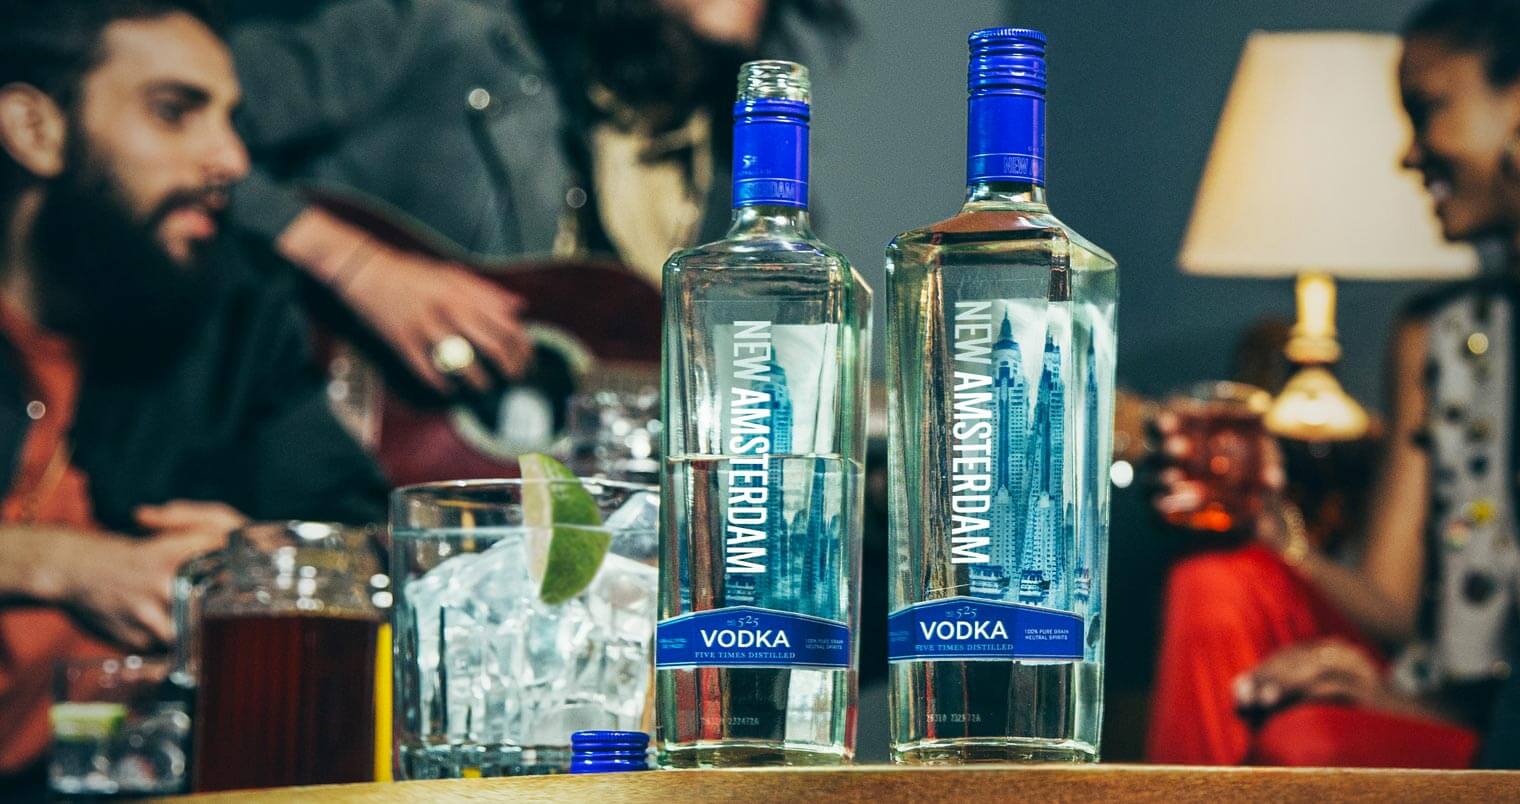 New Amsterdam Vodka Launches "Pour Your Soul Out" Ad Campaign, featured image